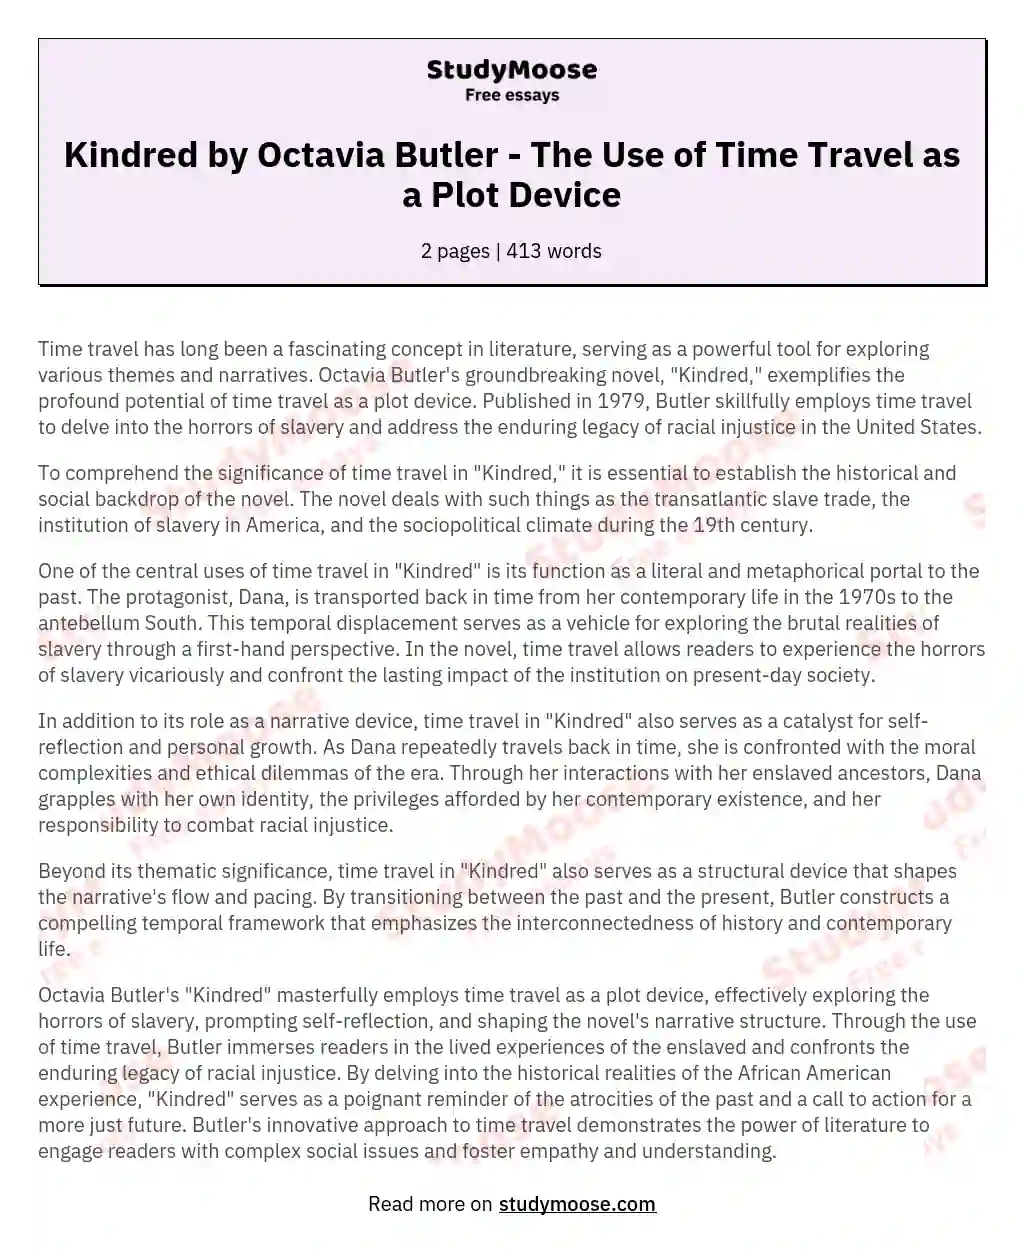 Kindred by Octavia Butler - The Use of Time Travel as a Plot Device essay